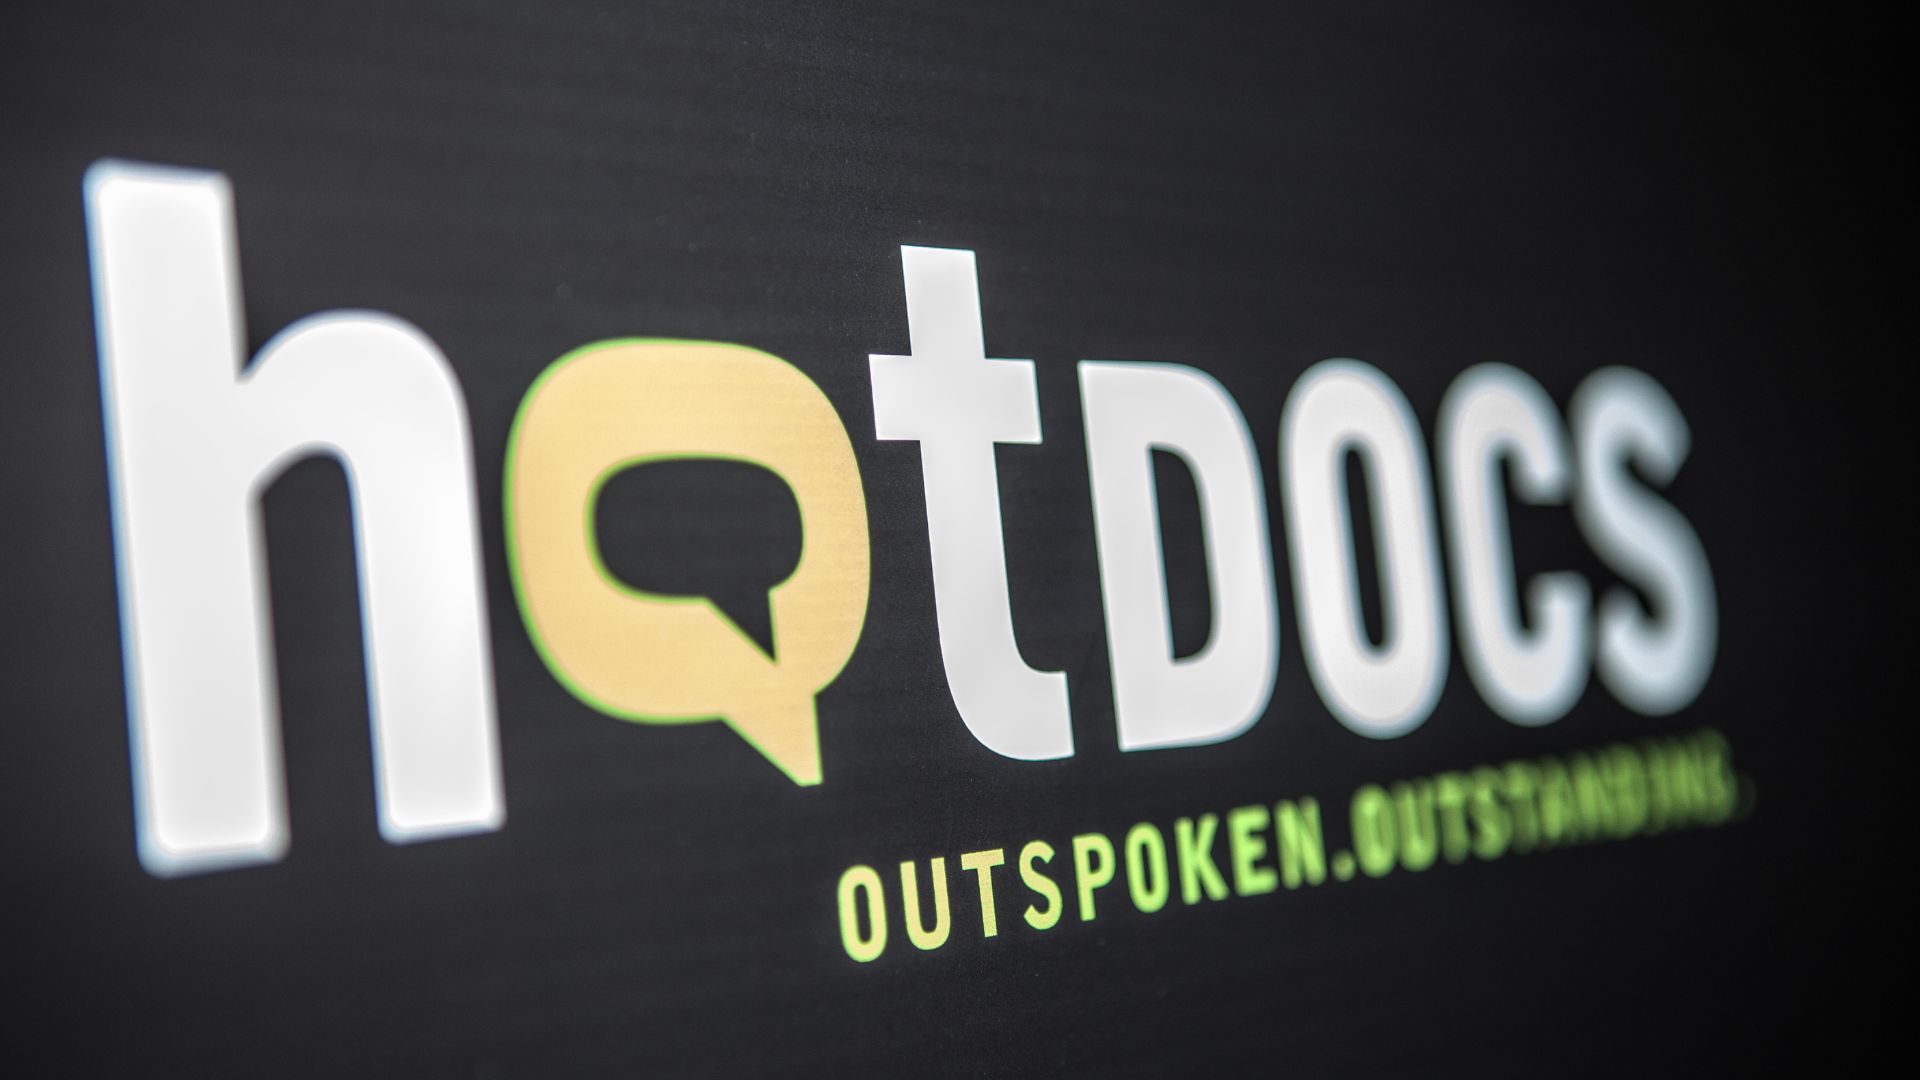 White and green Hot Docs logo with tagline that reads 'Outspoken. Outstanding.' against a black background.